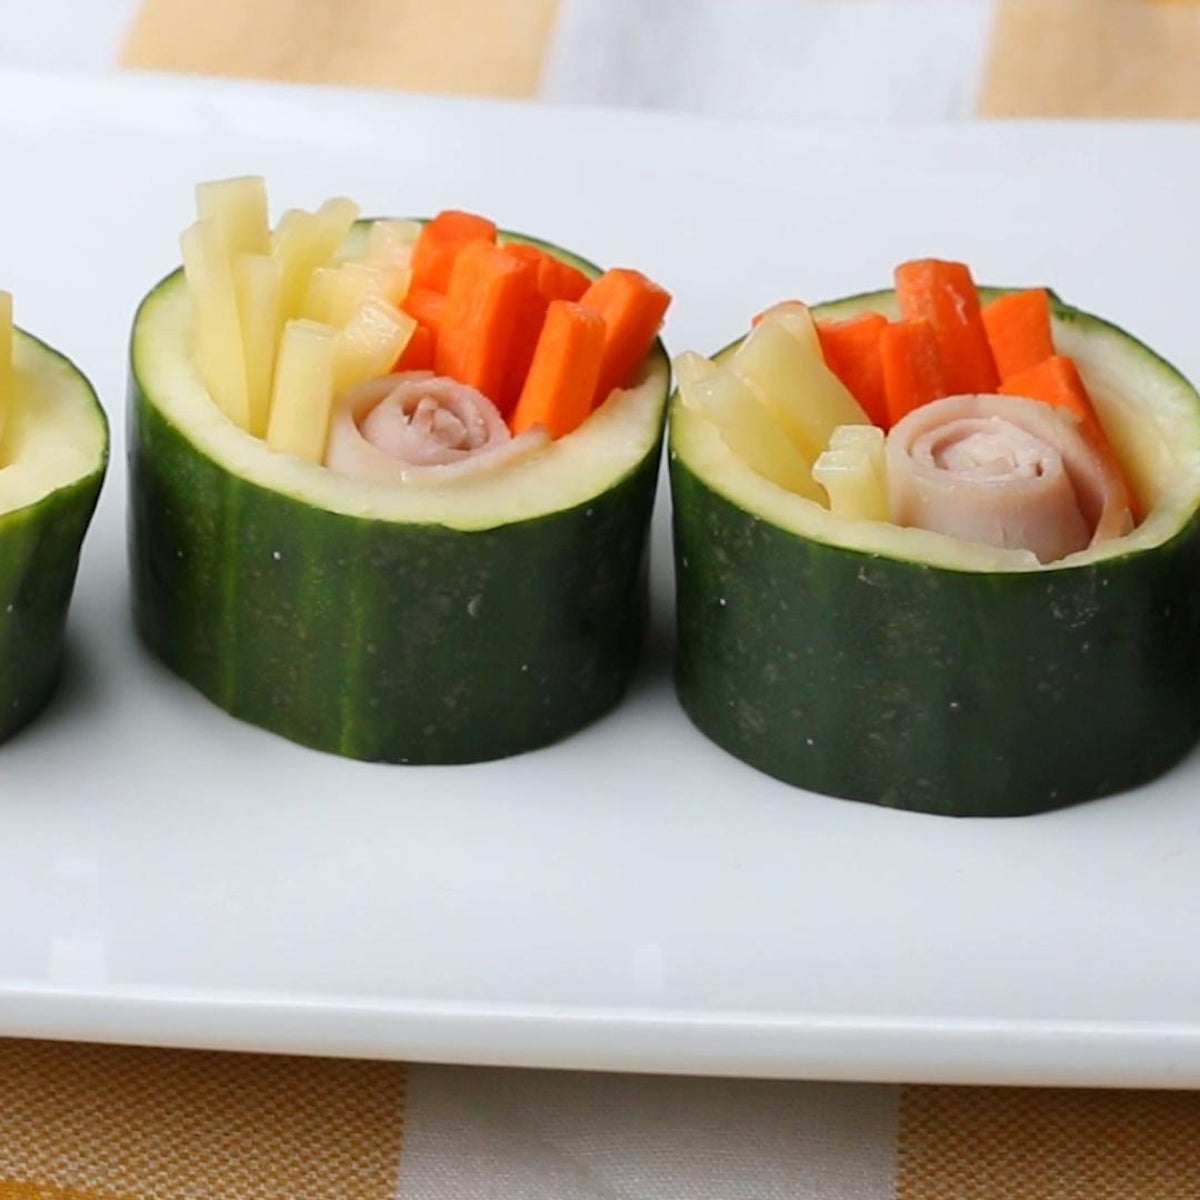 Cucumber Sushi HACK!, Gallery posted by Live Eat Learn